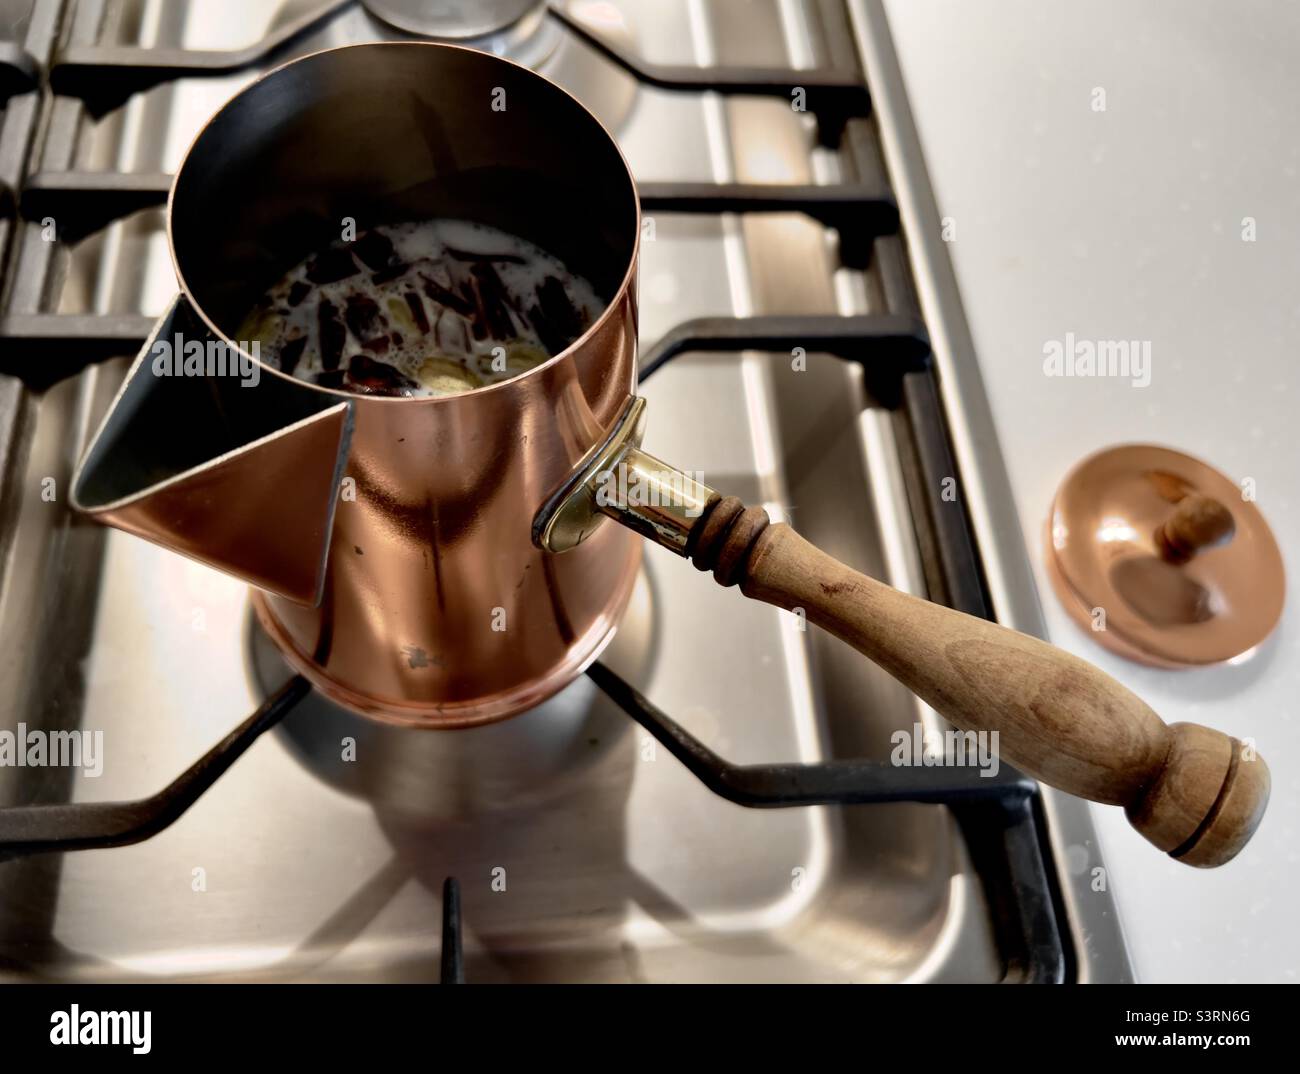 https://c8.alamy.com/comp/S3RN6G/antique-copper-turkish-coffee-pot-on-stove-with-chair-latte-ingredients-S3RN6G.jpg